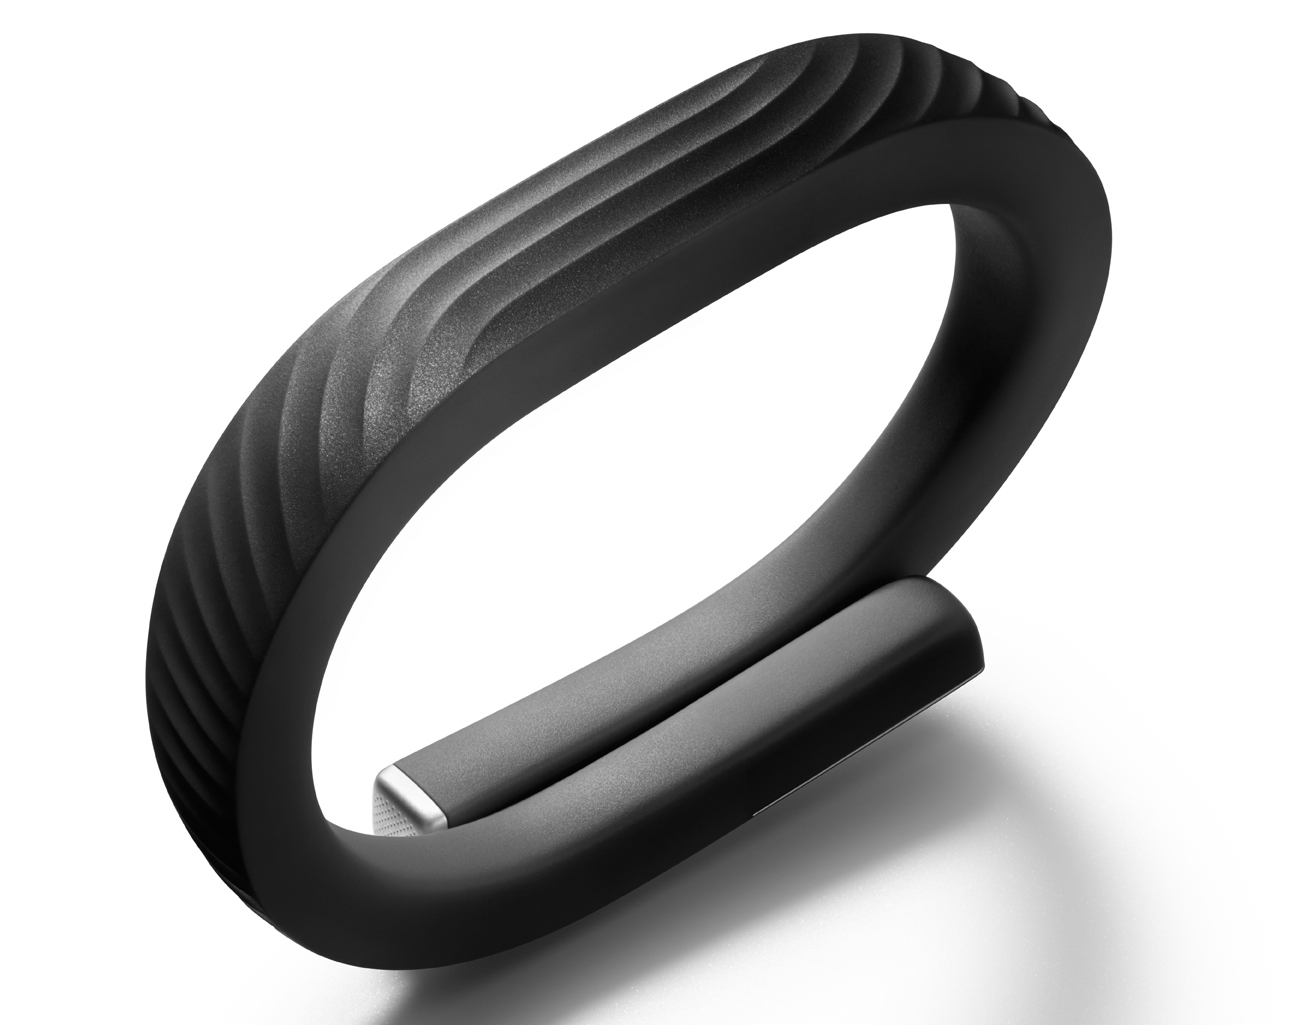 Jawbone UP24 activity wristband now on sale in Australia